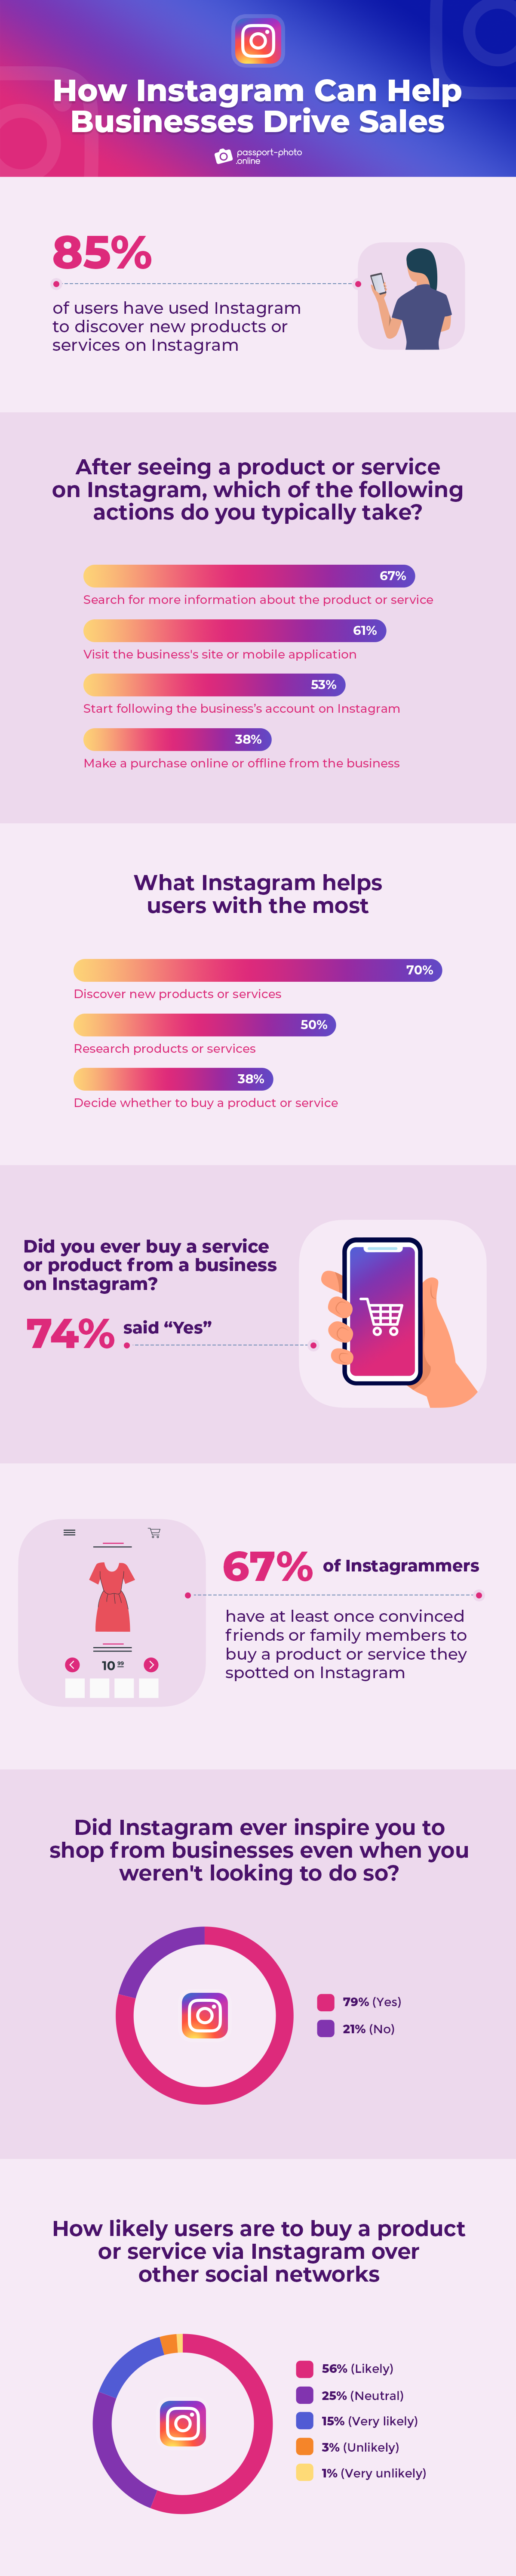 how Instagram can help businesses drive sales